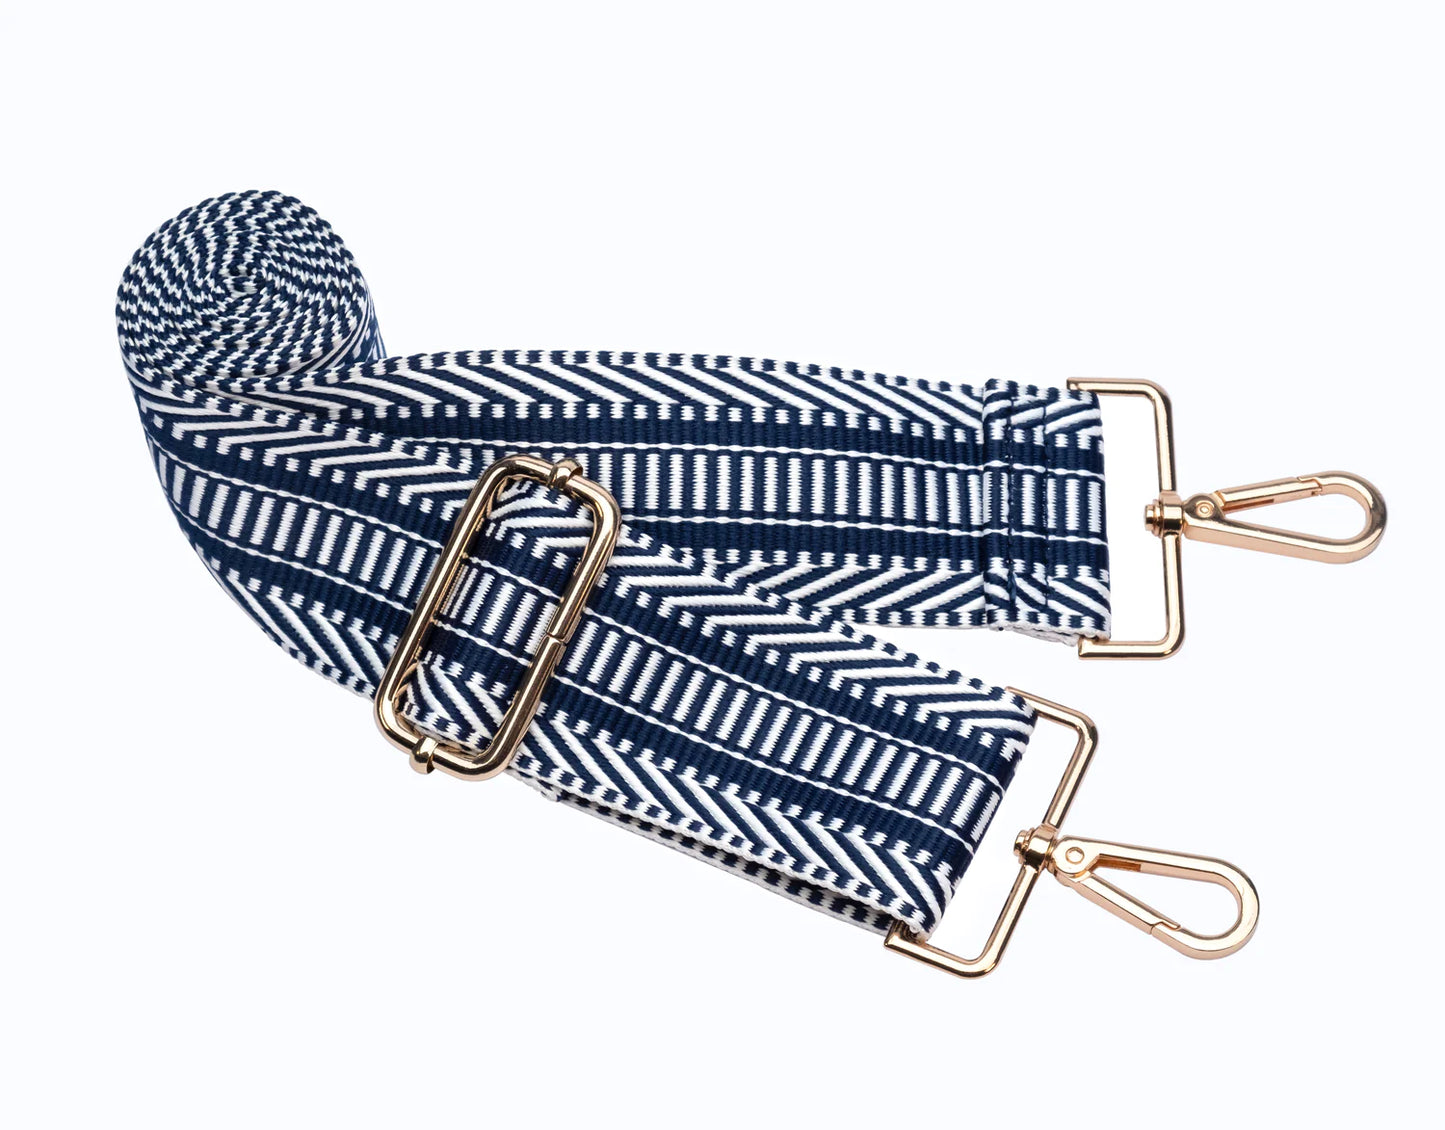 Wholesale Packs (2, 6, or 10) - Island Navy Blue Matte HydroBag with Navy/White Woven Strap